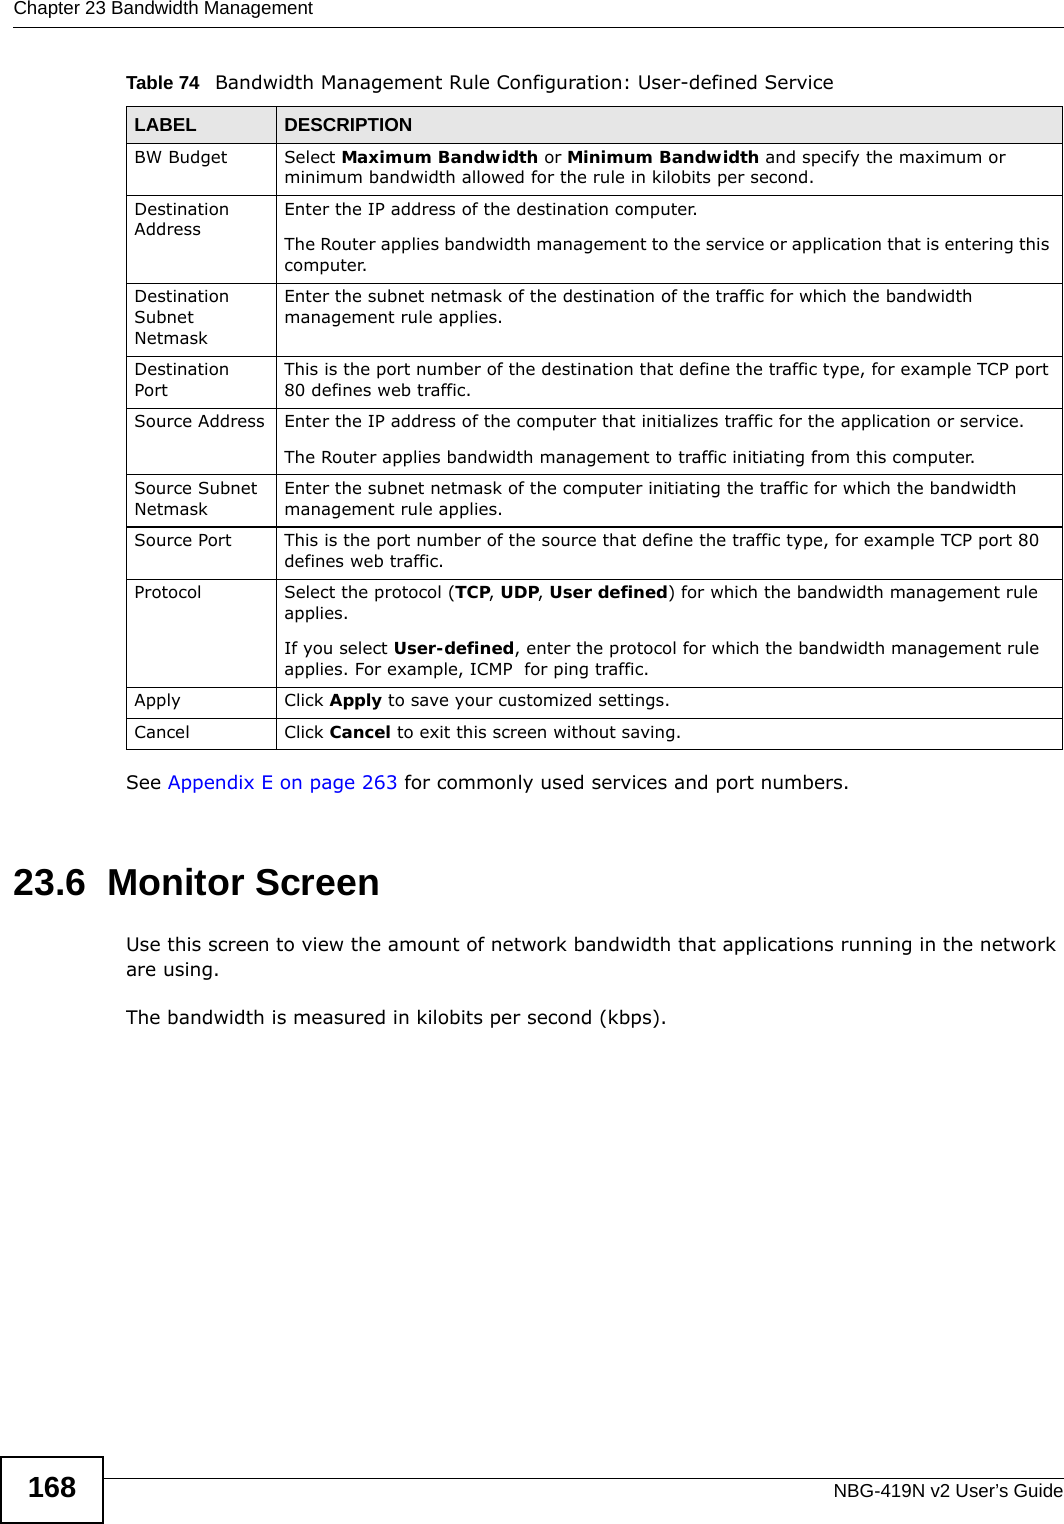 Chapter 23 Bandwidth ManagementNBG-419N v2 User’s Guide168Table 74   Bandwidth Management Rule Configuration: User-defined Service  See Appendix E on page 263 for commonly used services and port numbers.23.6  Monitor ScreenUse this screen to view the amount of network bandwidth that applications running in the network are using.The bandwidth is measured in kilobits per second (kbps). LABEL DESCRIPTIONBW Budget Select Maximum Bandwidth or Minimum Bandwidth and specify the maximum or minimum bandwidth allowed for the rule in kilobits per second.  Destination AddressEnter the IP address of the destination computer.The Router applies bandwidth management to the service or application that is entering this computer. Destination Subnet NetmaskEnter the subnet netmask of the destination of the traffic for which the bandwidth management rule applies.Destination PortThis is the port number of the destination that define the traffic type, for example TCP port 80 defines web traffic.Source Address Enter the IP address of the computer that initializes traffic for the application or service. The Router applies bandwidth management to traffic initiating from this computer. Source Subnet NetmaskEnter the subnet netmask of the computer initiating the traffic for which the bandwidth management rule applies.Source Port This is the port number of the source that define the traffic type, for example TCP port 80 defines web traffic.Protocol Select the protocol (TCP, UDP, User defined) for which the bandwidth management rule applies. If you select User-defined, enter the protocol for which the bandwidth management rule applies. For example, ICMP  for ping traffic.Apply Click Apply to save your customized settings.Cancel Click Cancel to exit this screen without saving.